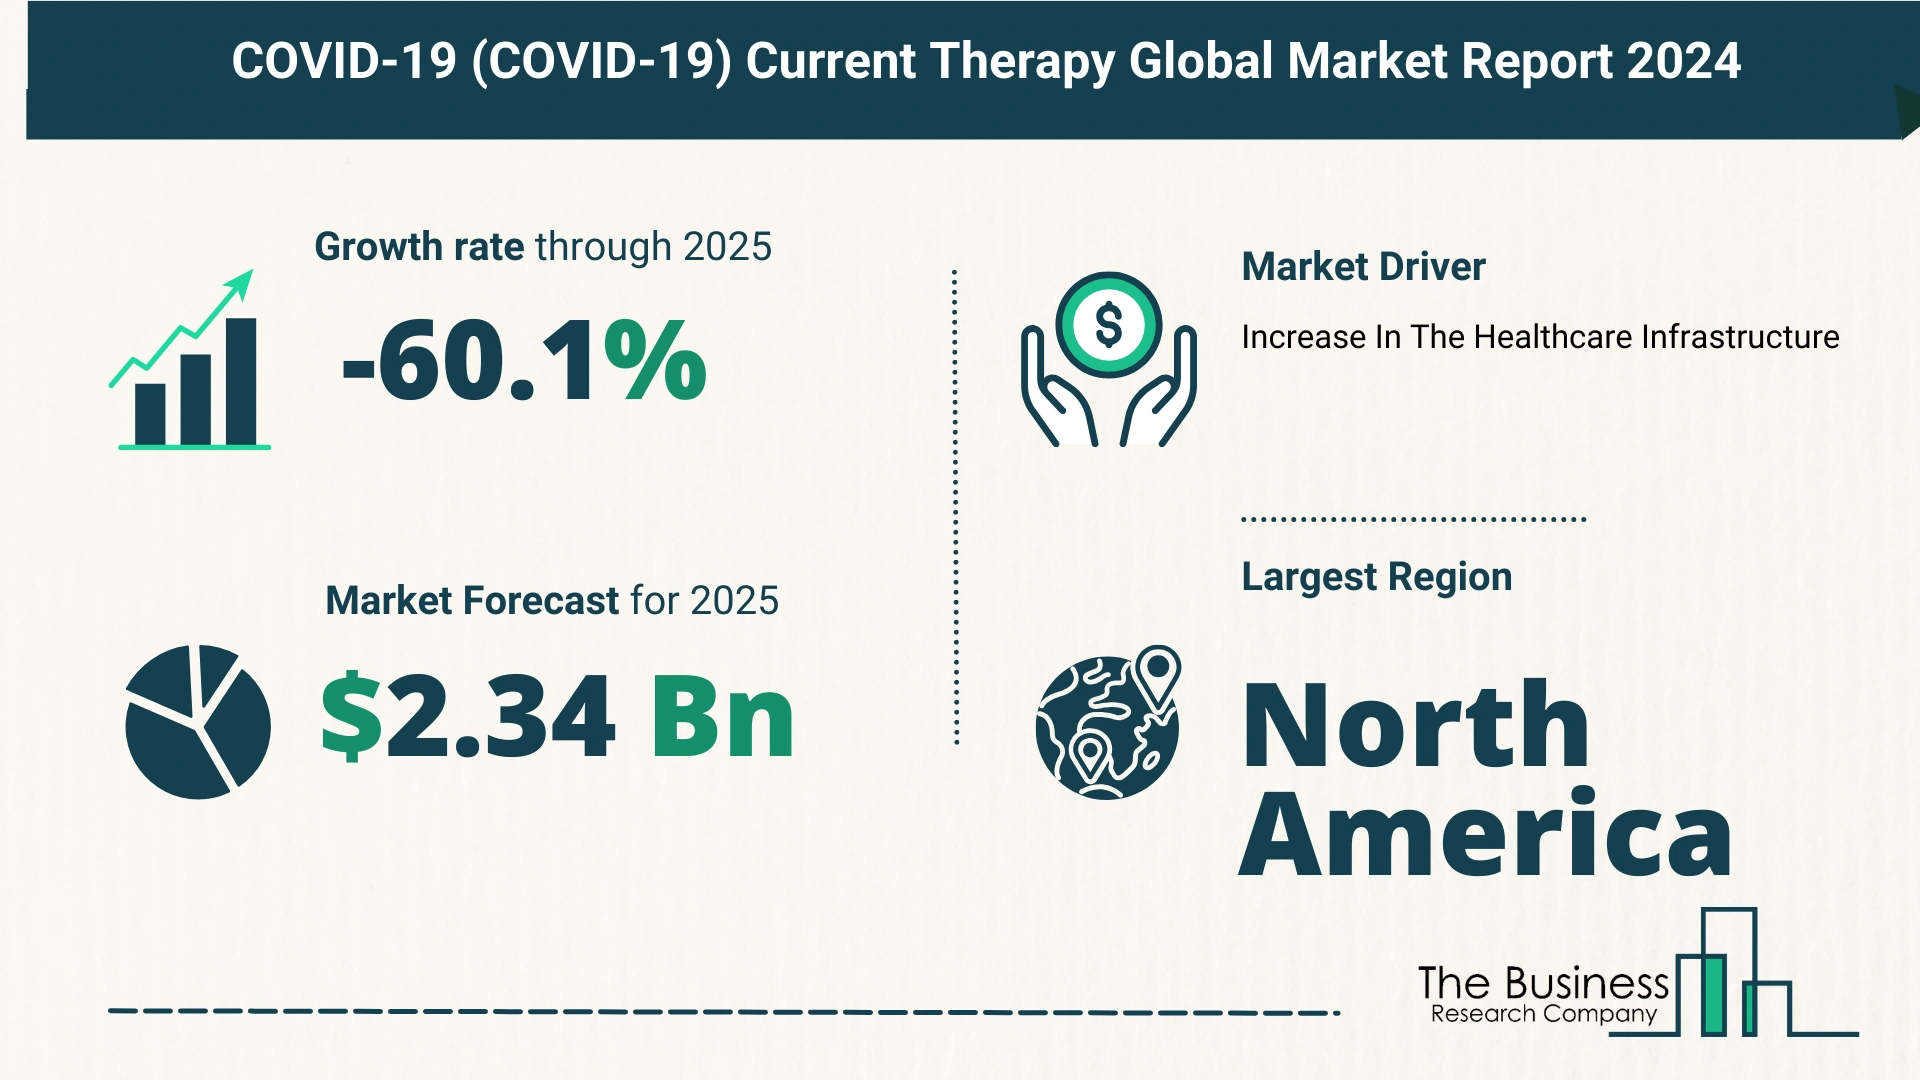 What Is The Forecast Growth Rate For The COVID-19 (COVID-19) Current Therapy Market?